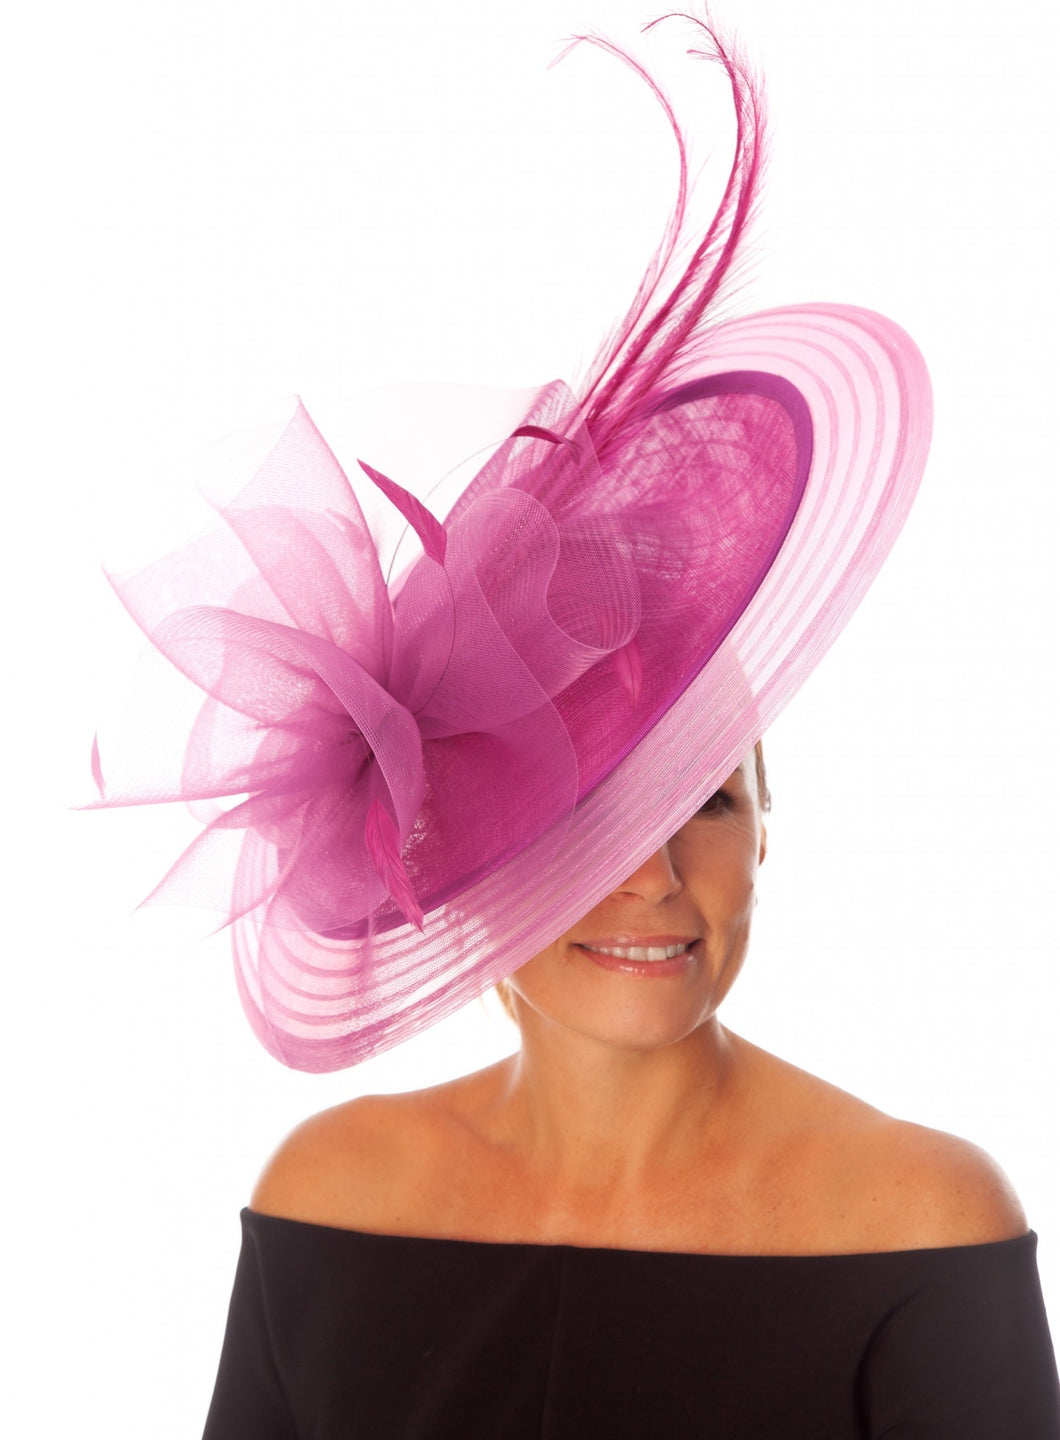 Snoxell & Gwyther - SG/RJ 1034 fascinator